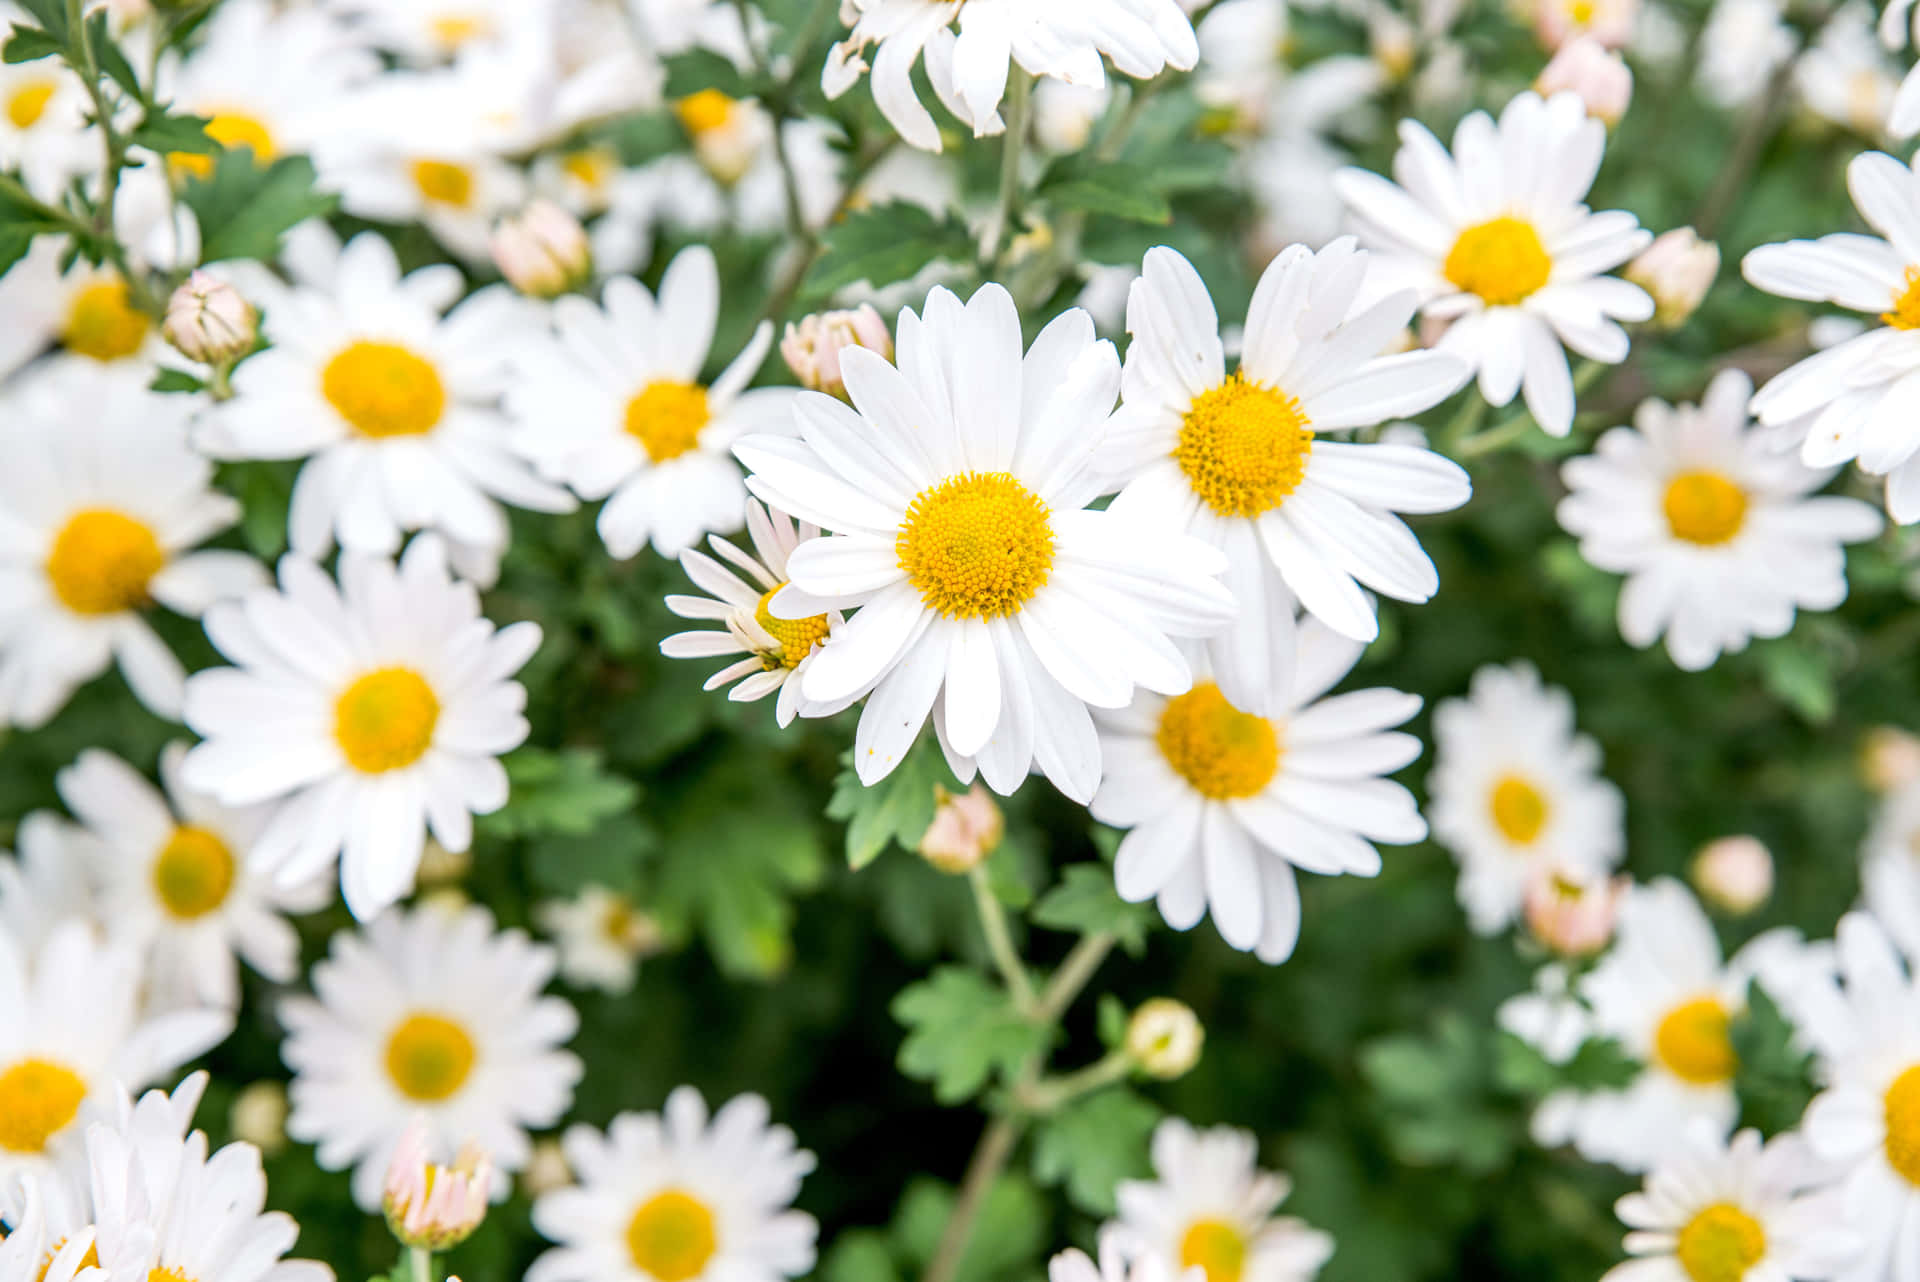 A Close Up Of White Daisies With Yellow Centers